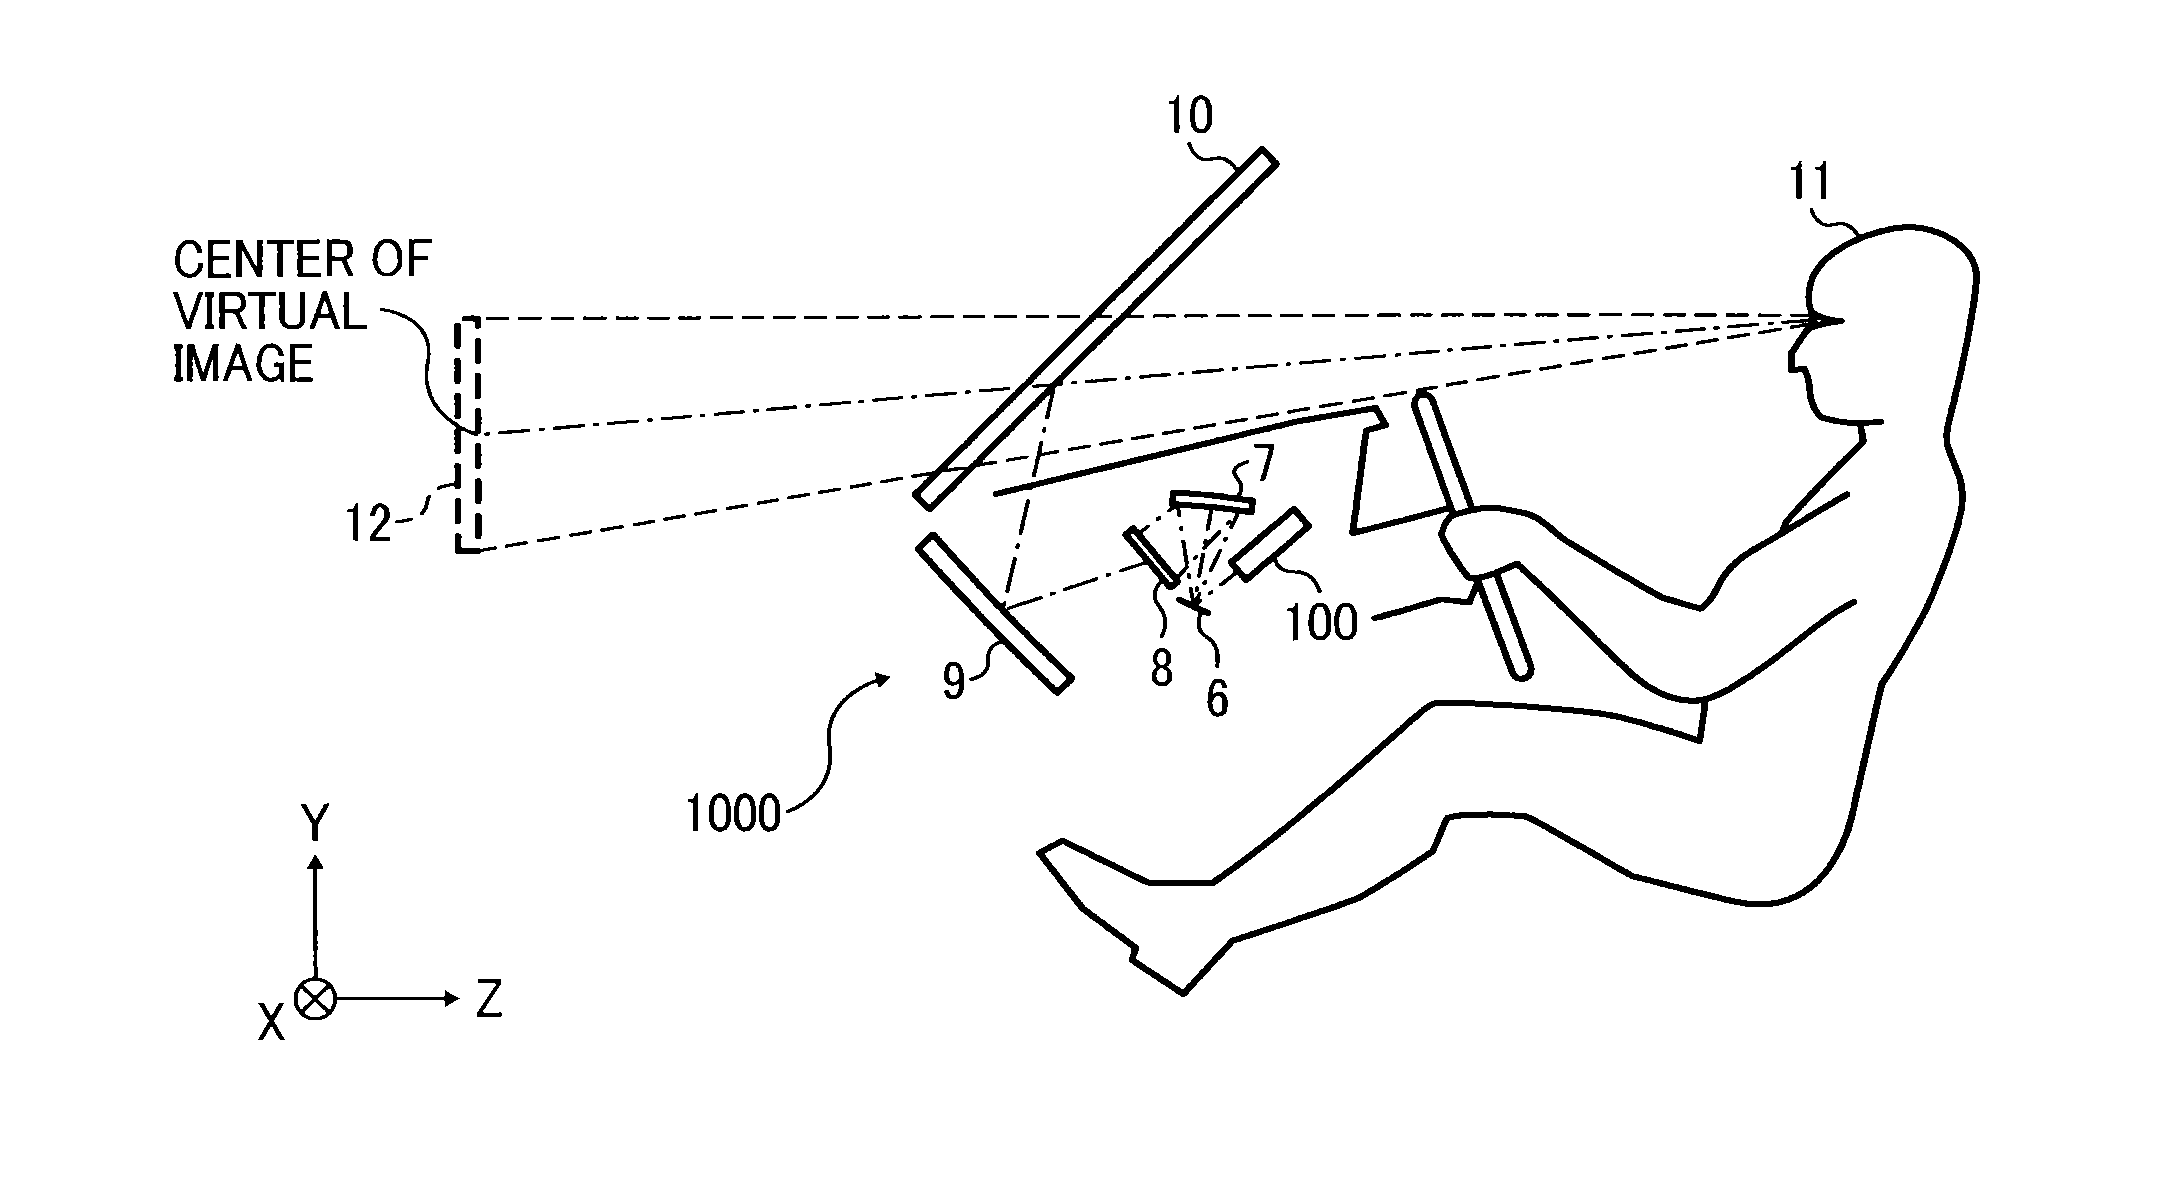 Image display apparatus and object apparatus